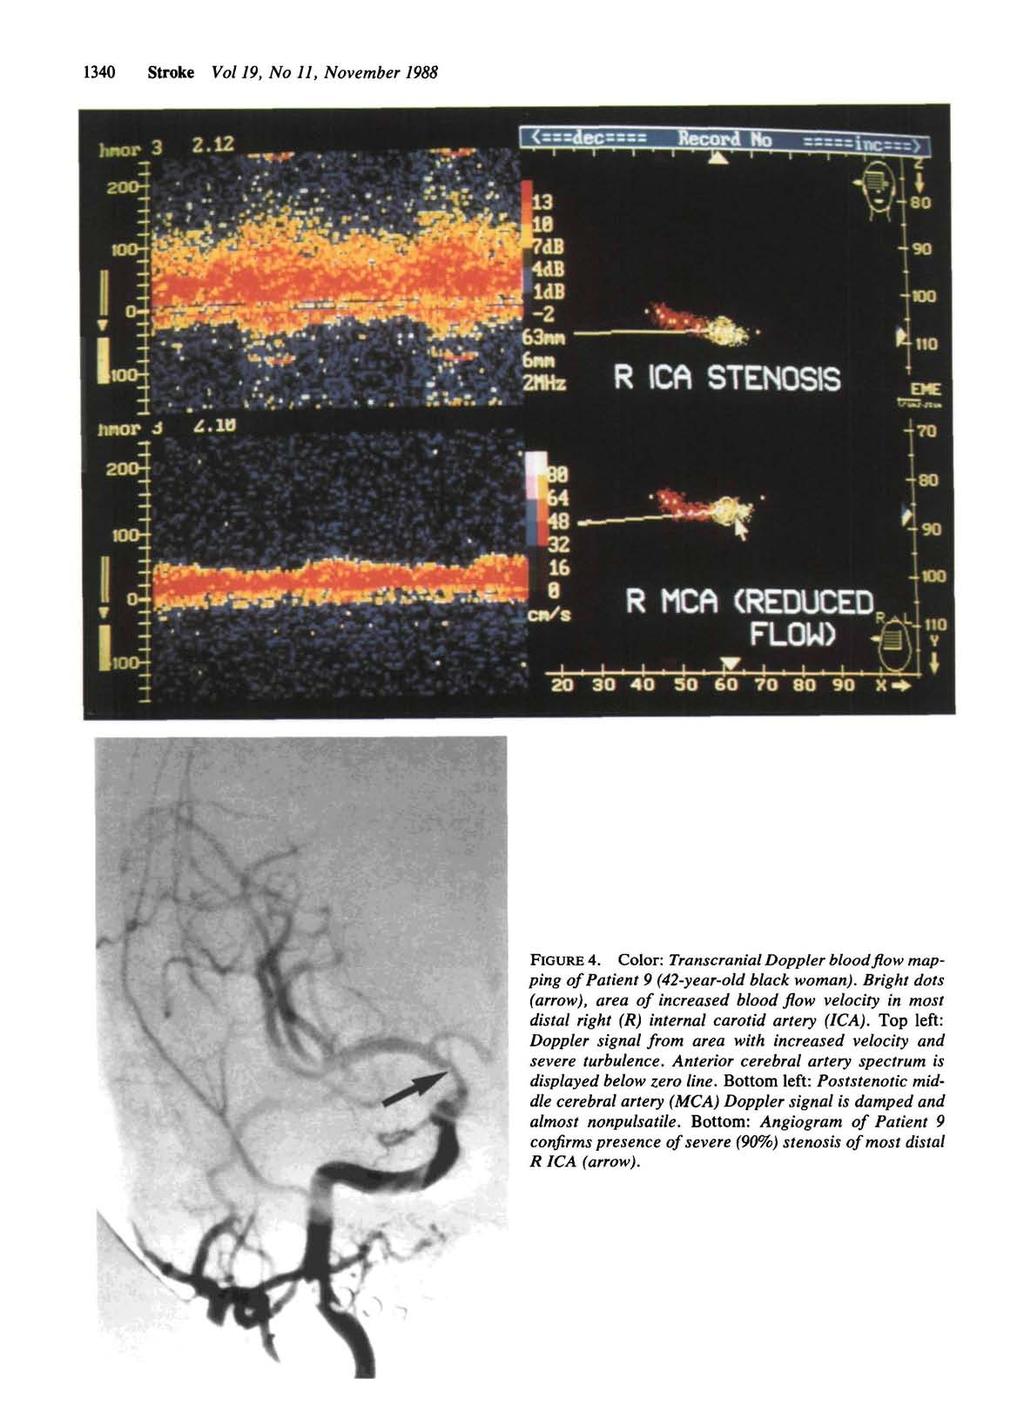 340 Stroke Vol 9, No, November 988 Downloaded from http://ahajournals.org by on October 8, 208 FIGURE 4. Color: Transcranial Doppler bloodflowmapping of Patient 9 (42-year-old black woman).